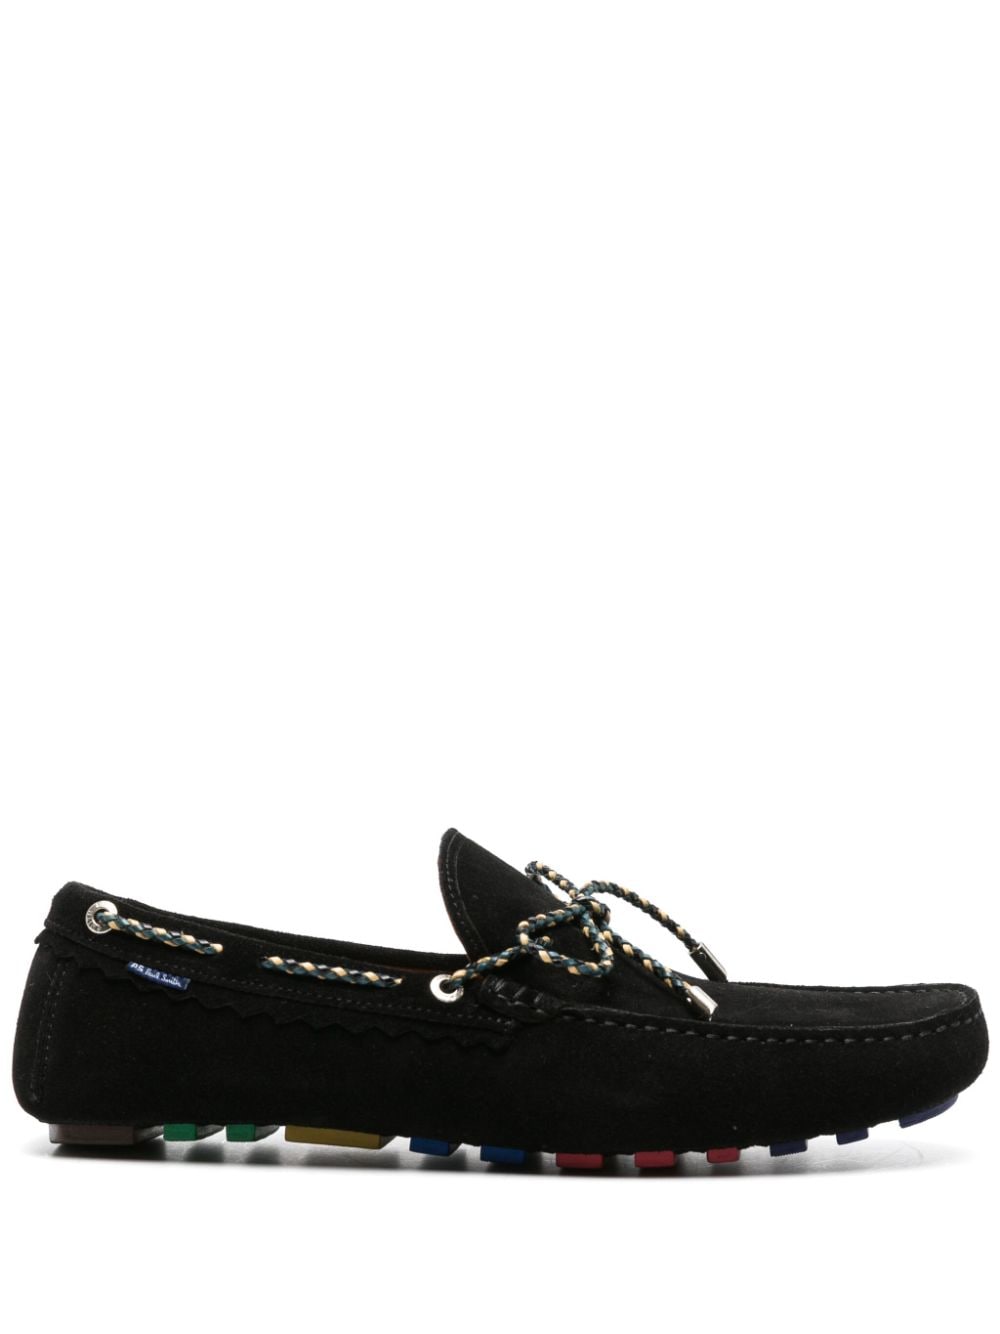 PS Paul Smith Springfield suede boat shoes Black